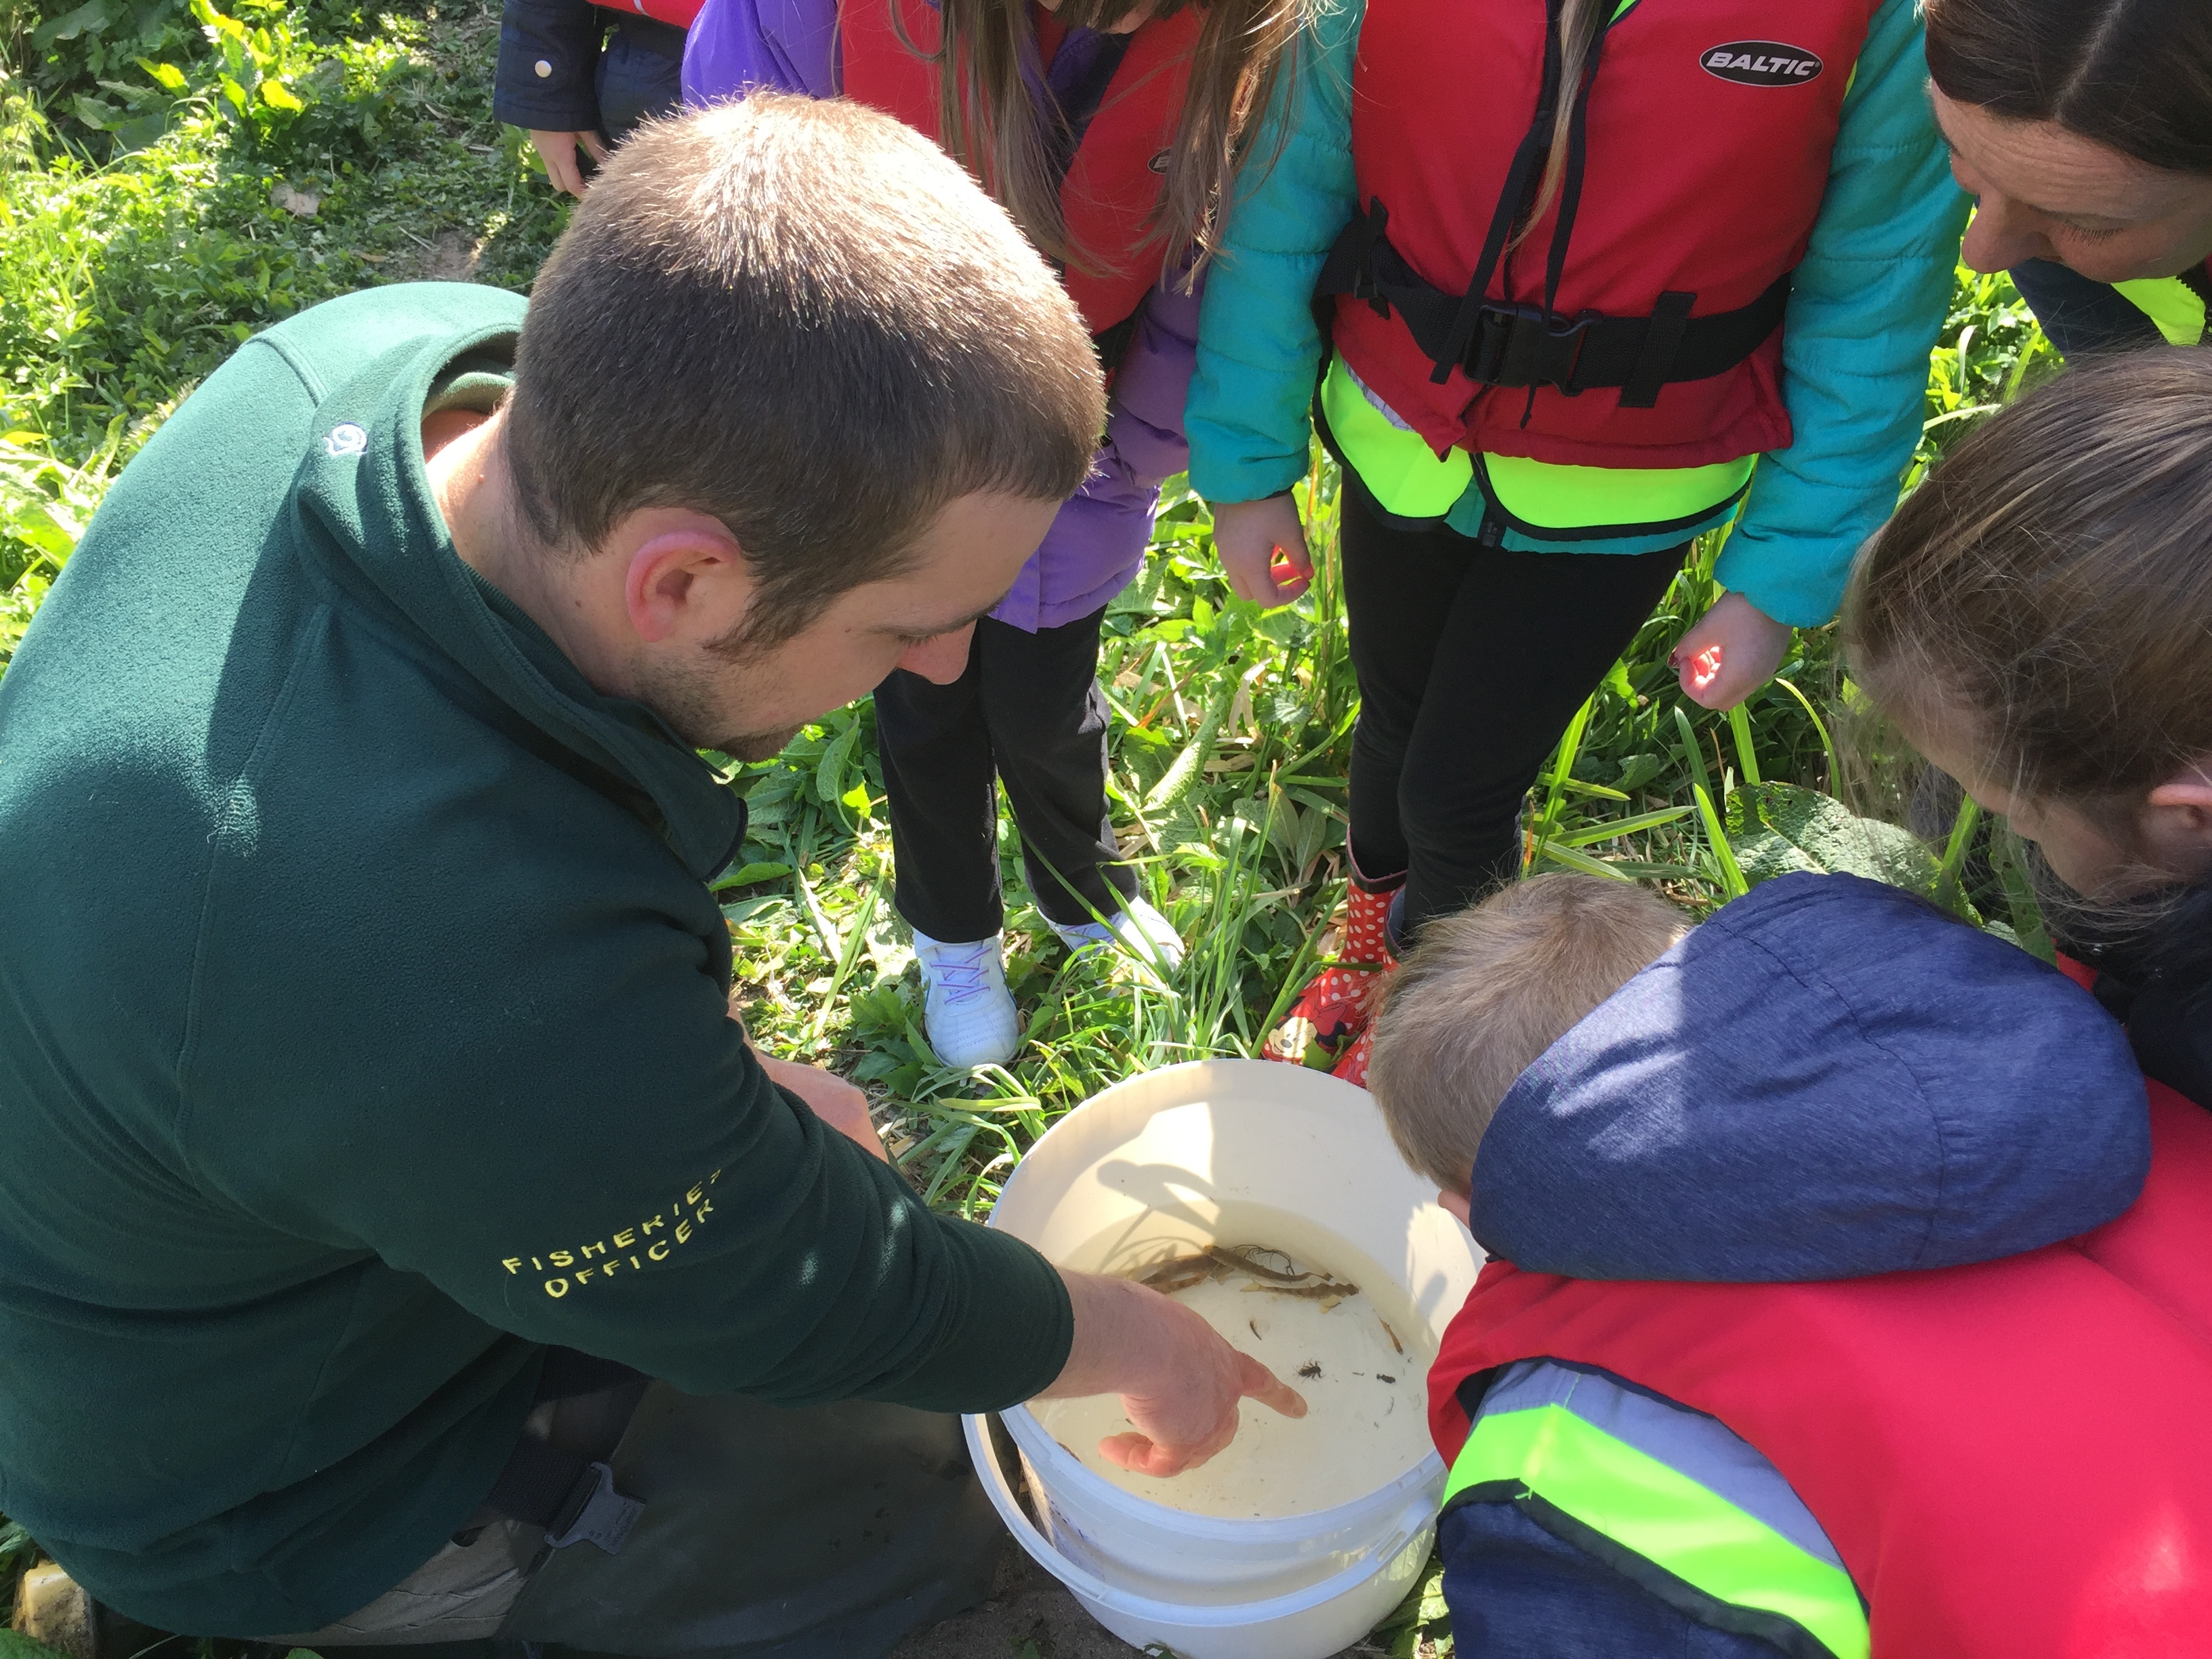 A fisheries officer for the River Dee Trust helps youngsters get up close and personal with some of the animals that live in the river.